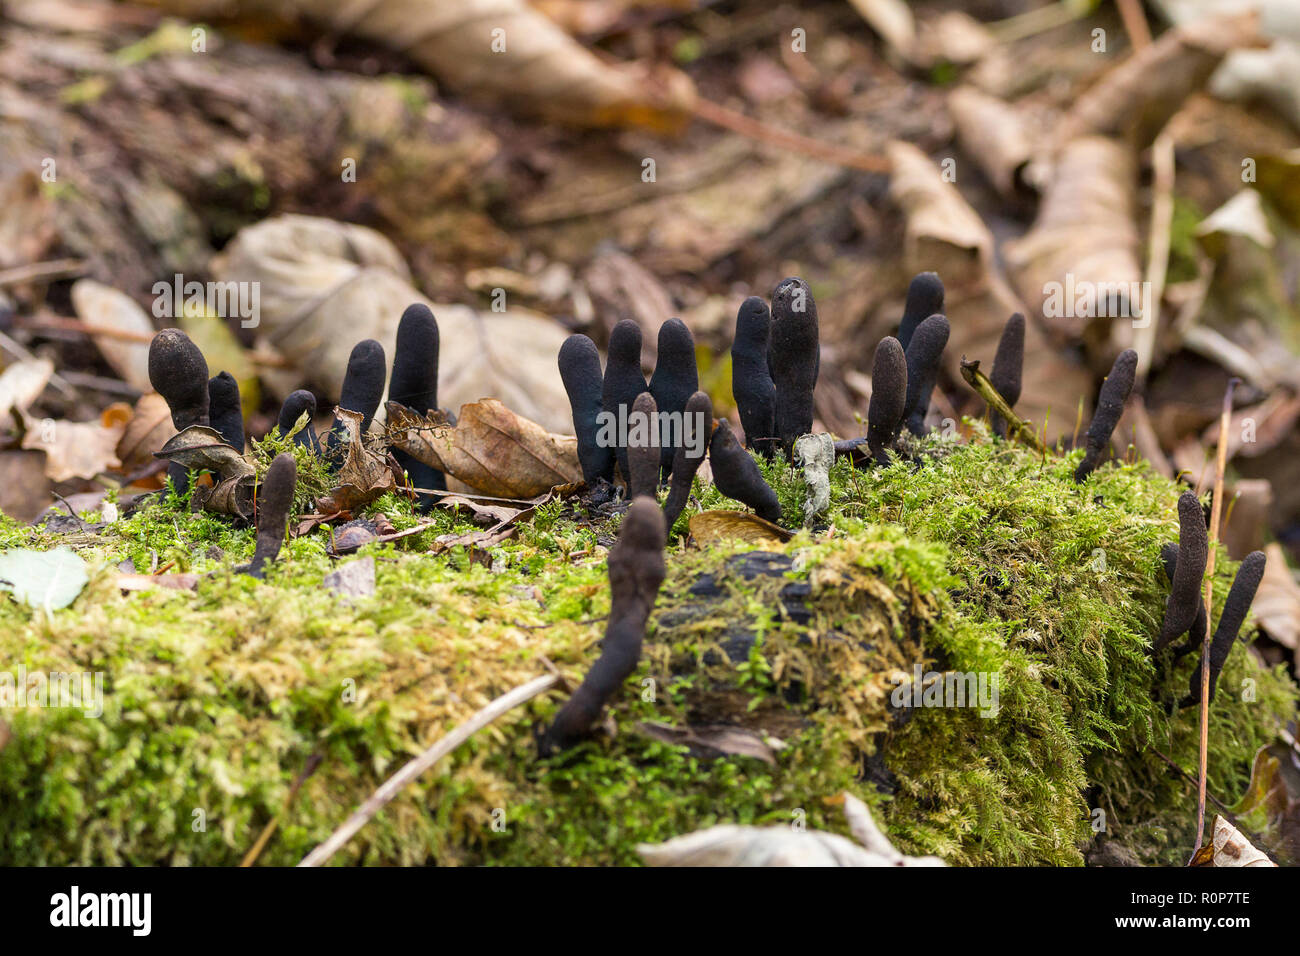 Dead man's finger's (Xylaria polymorpha) growing in moss covered decaying wood. Multiple black various shaped fingers of fungi against the green moss. Stock Photo